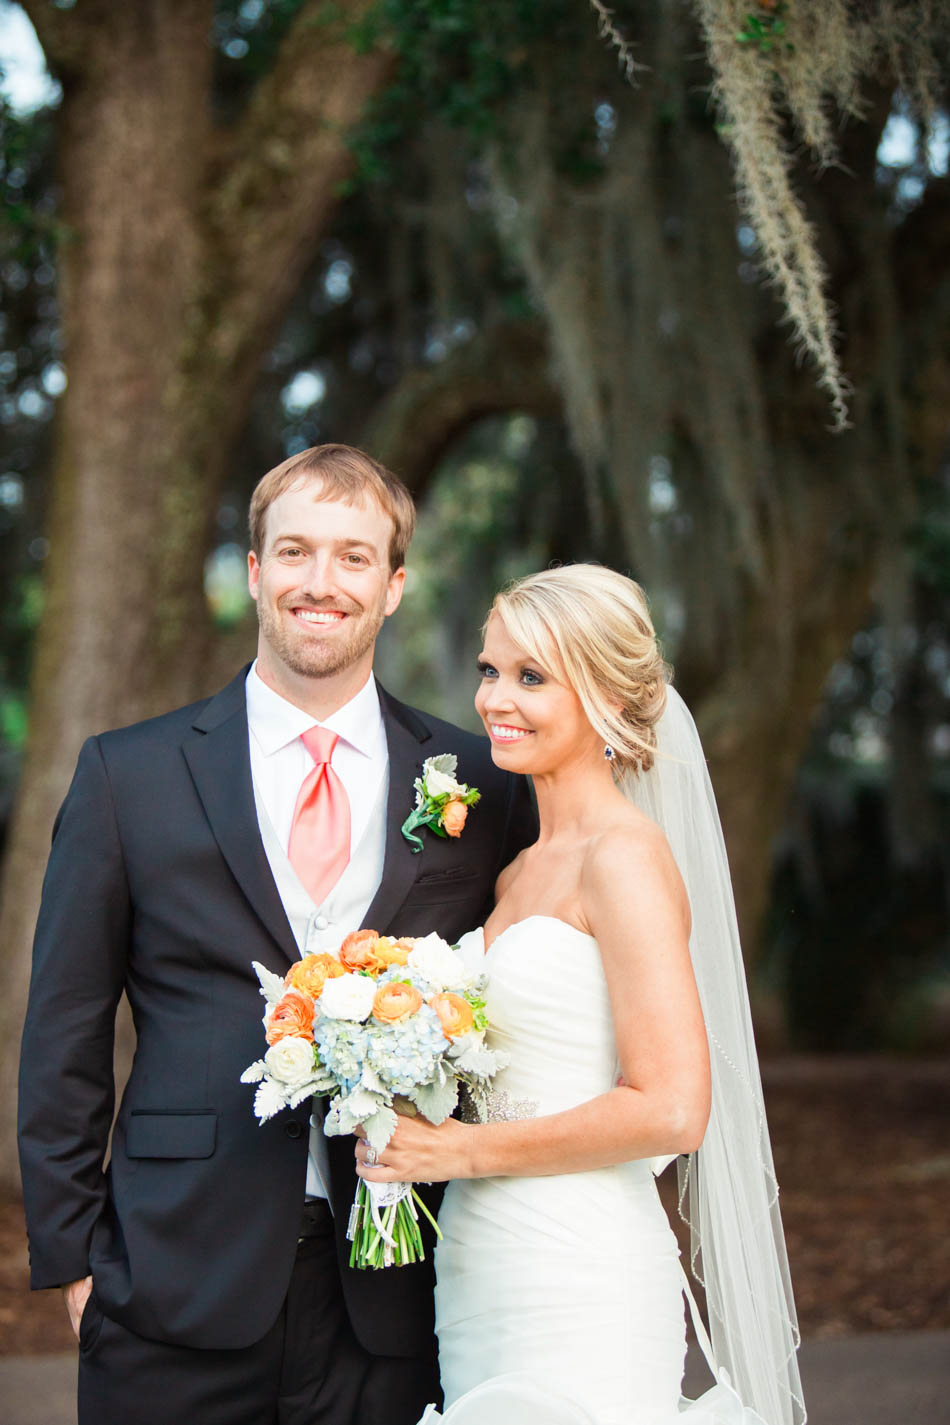 Bride and groom smile under oak trees, Dunes West Golf and River Club, Mt Pleasant, South Carolina. Kate Timbers Photography. http://katetimbers.com